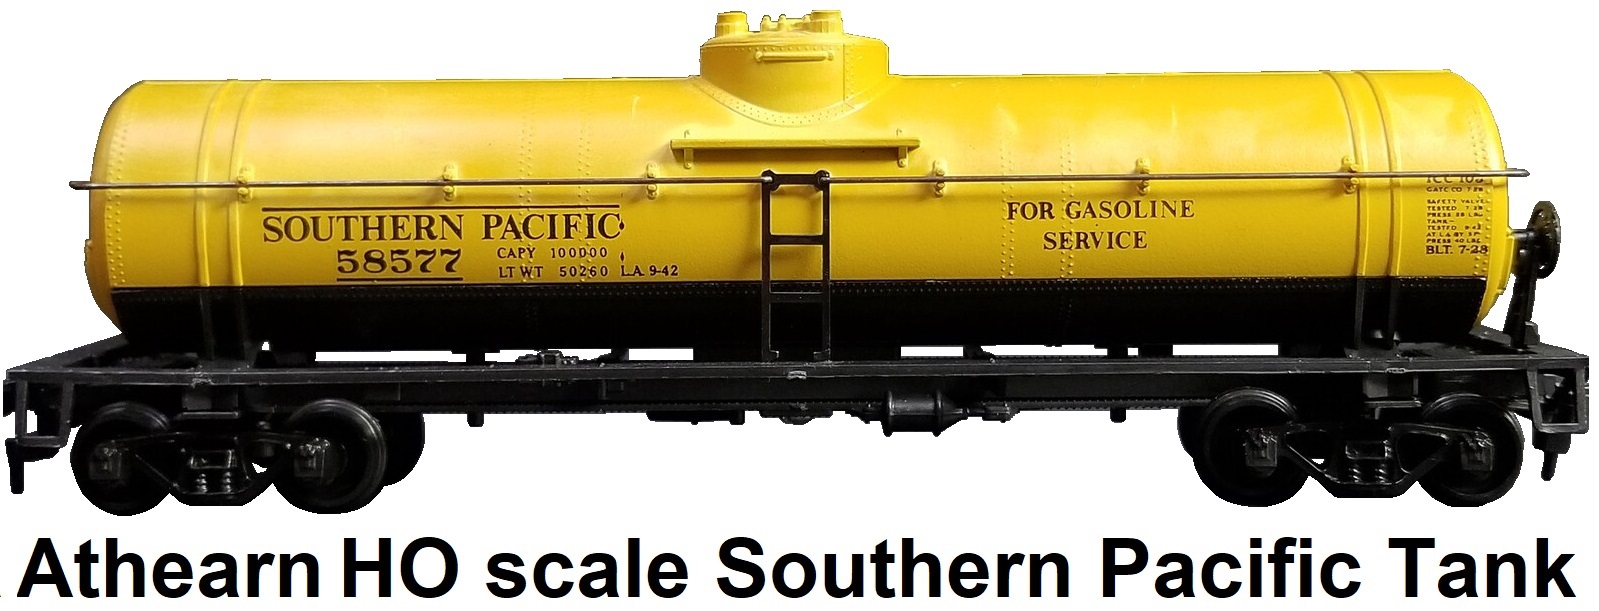 Athearn HO gauge Southern Pacific Single Dome Tank Car Sp #58577 Yellow